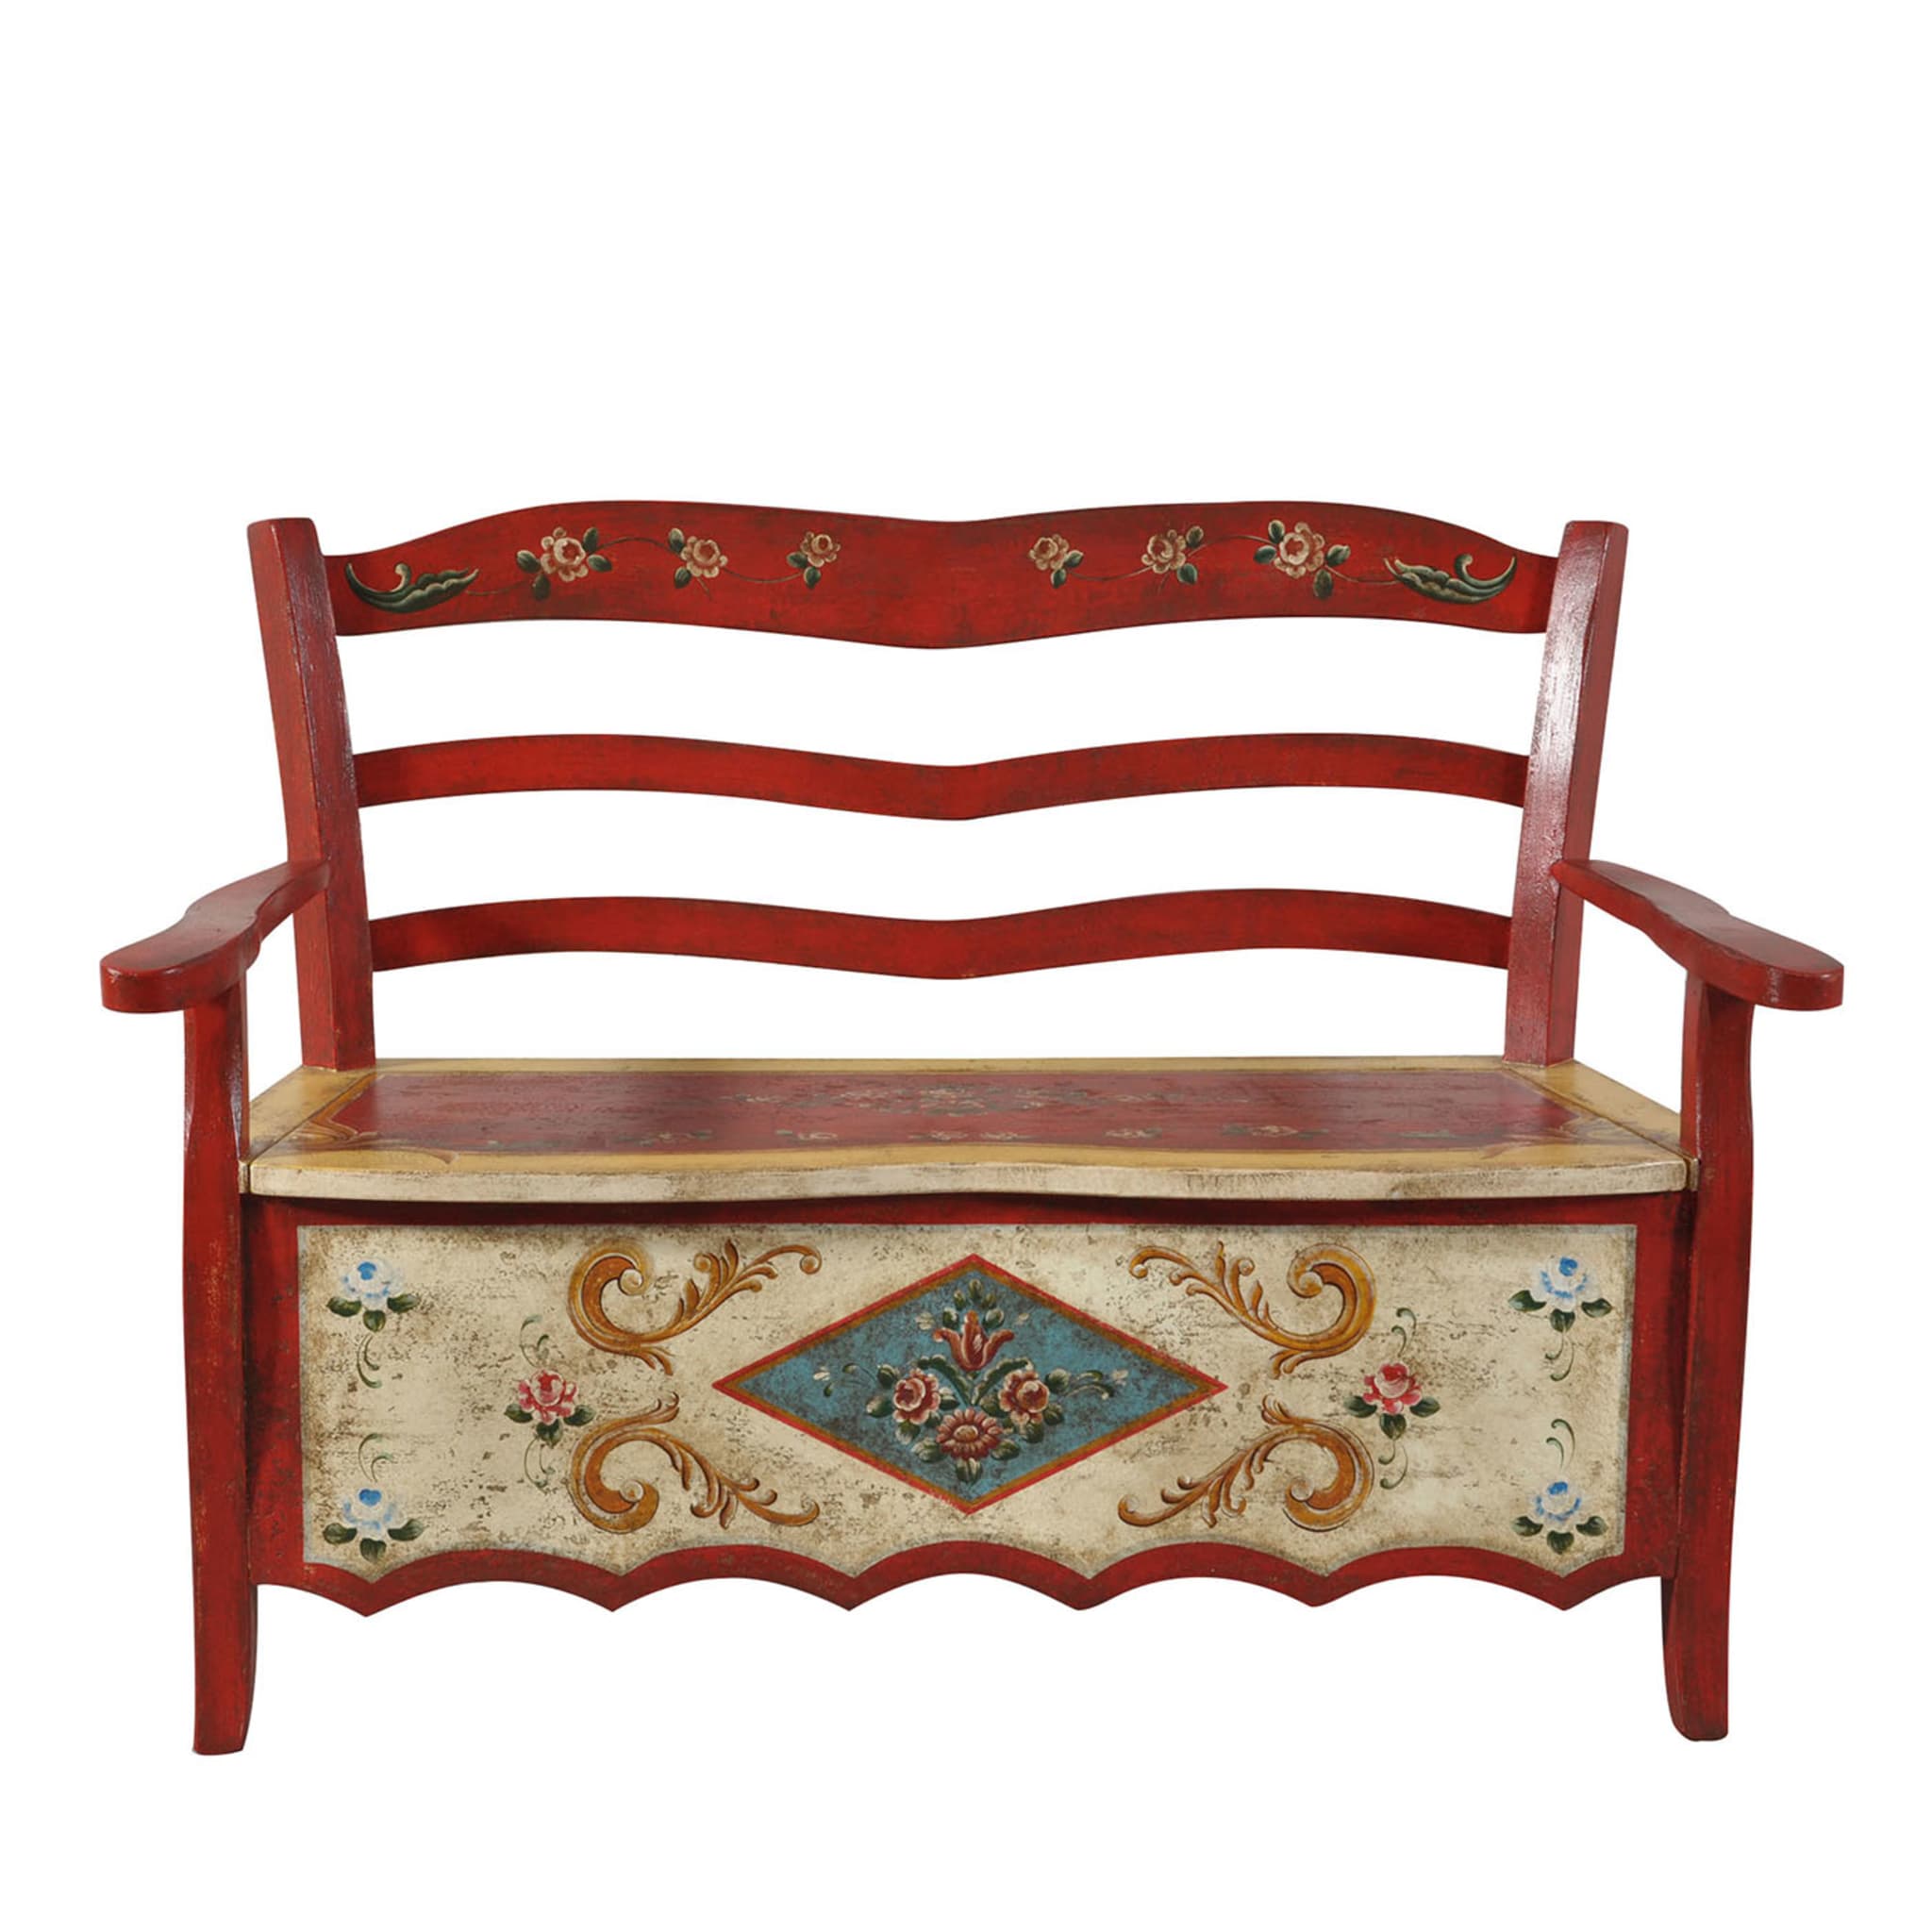 17th-Century-Style Tyrolean Baroque Storage Bench - Main view